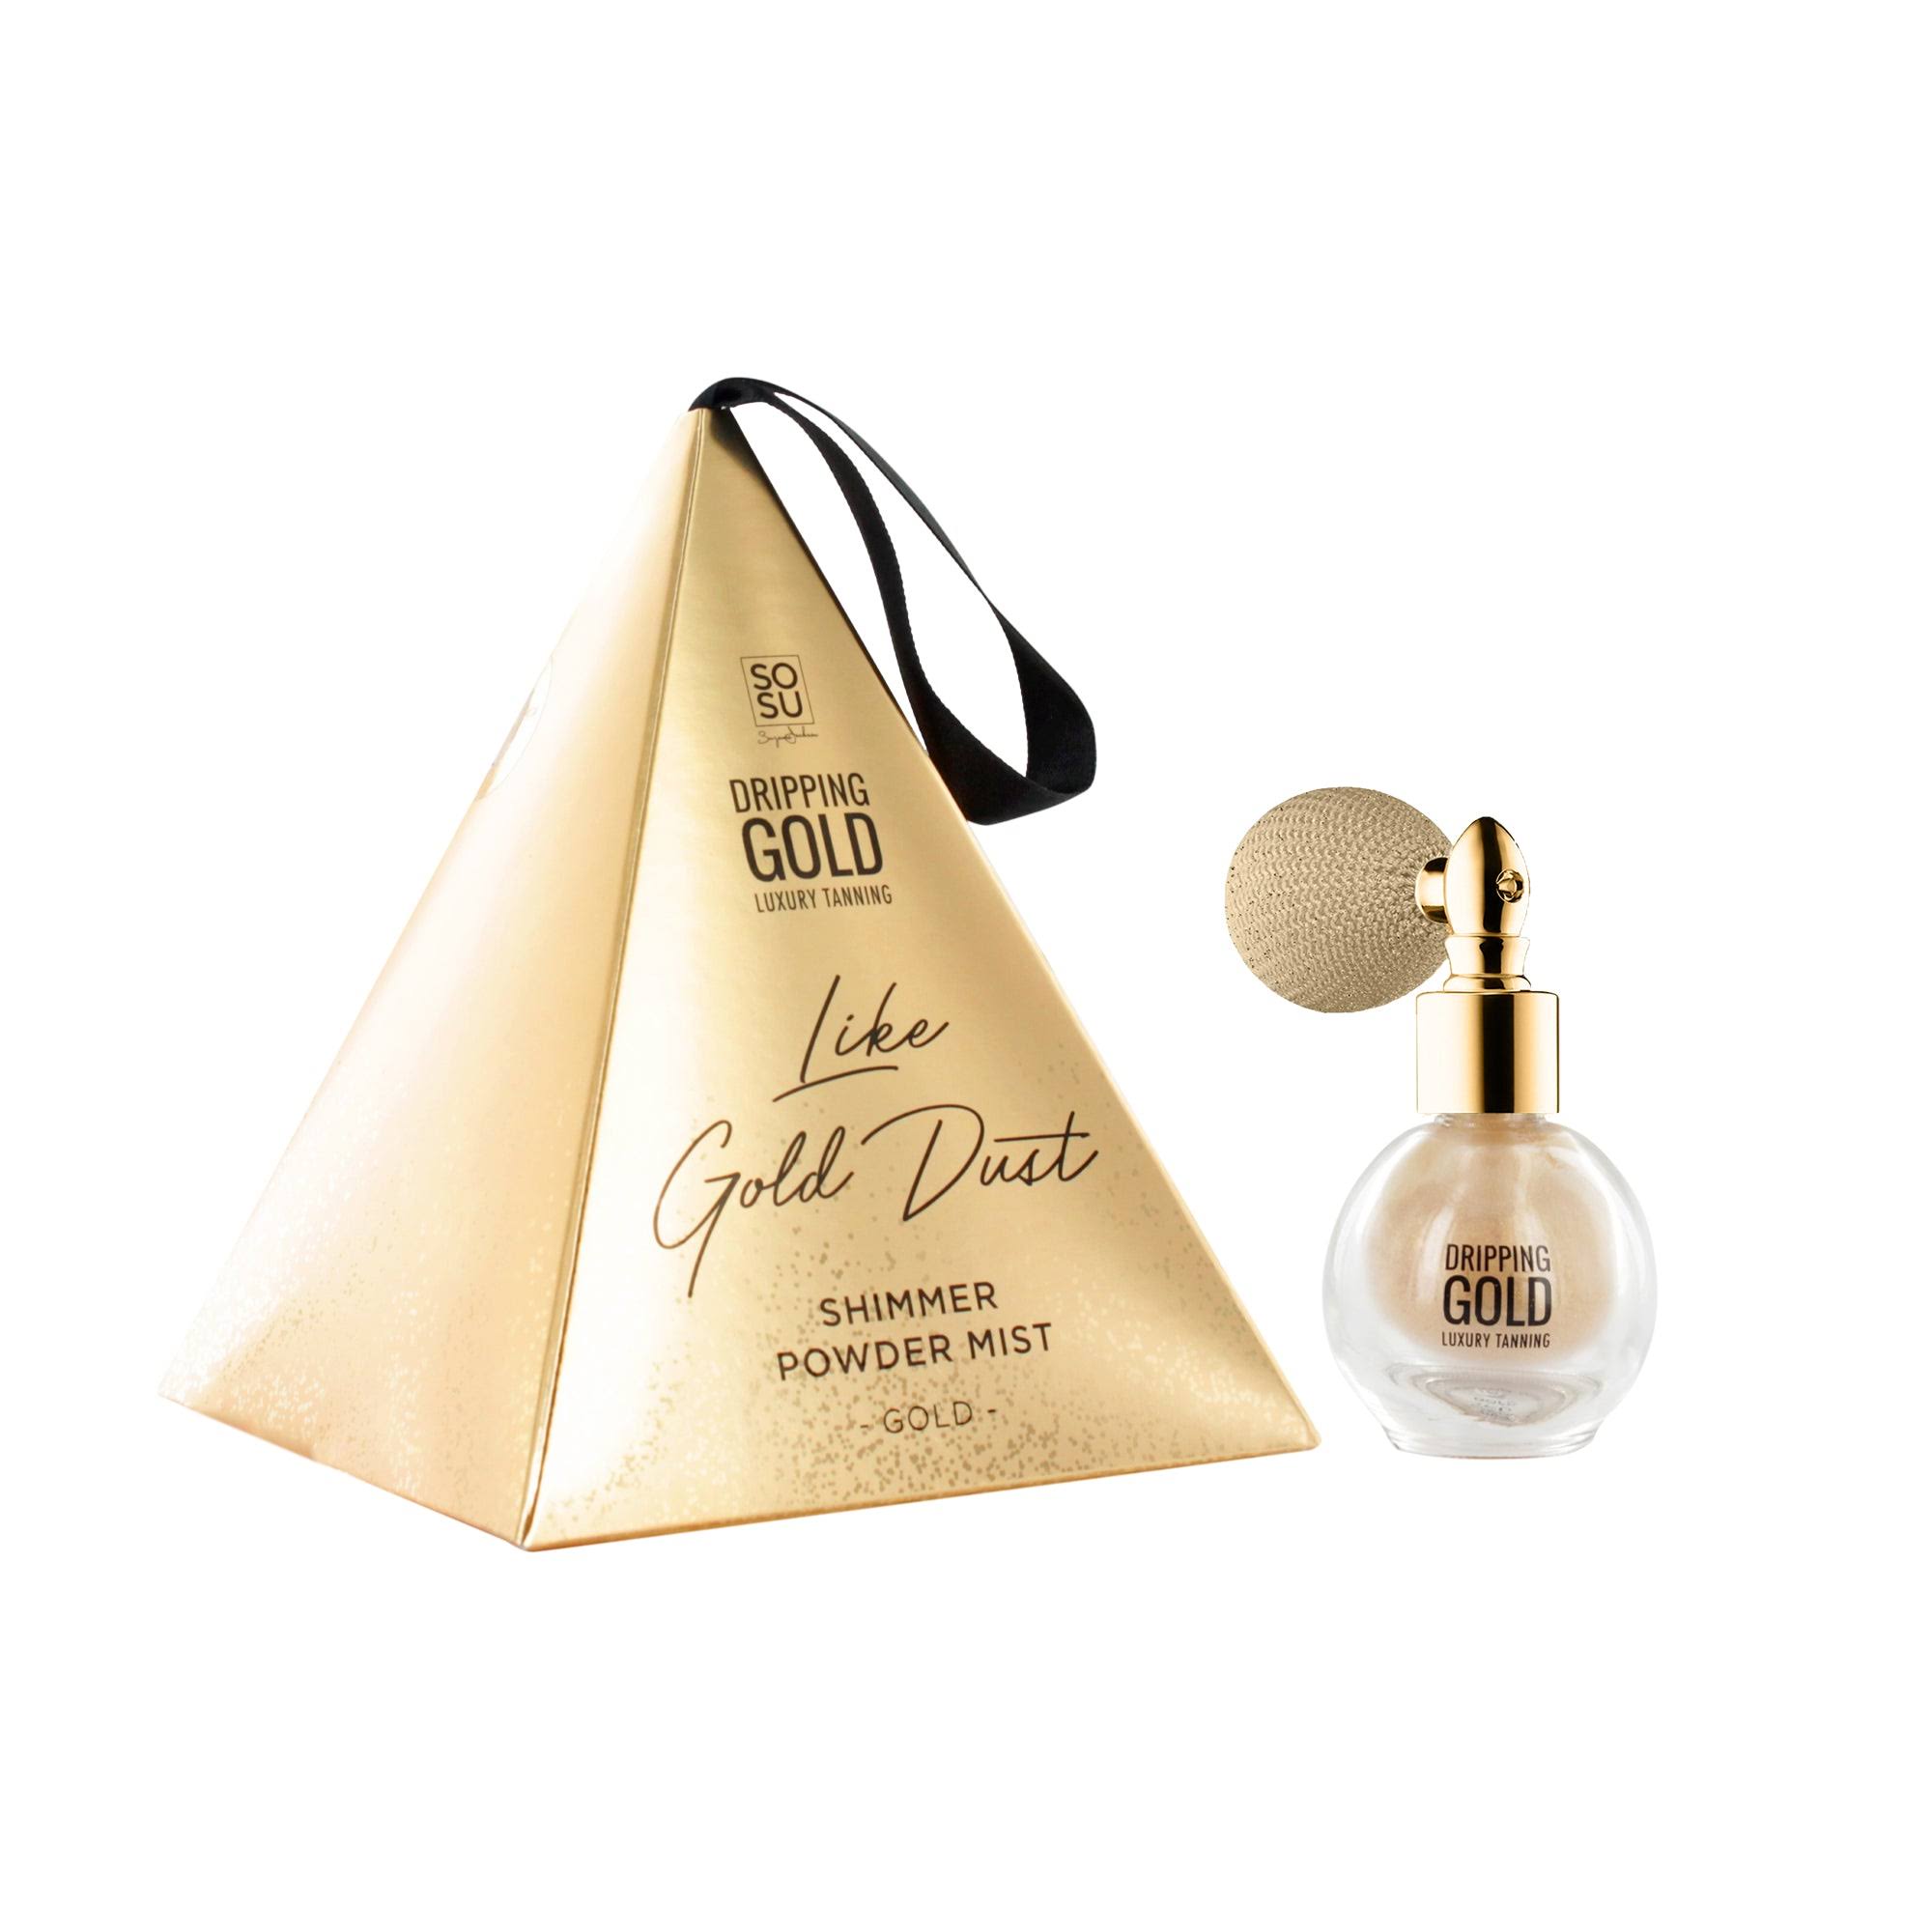 SOSU by Suzanne Jackson Dripping Gold Like Gold Dust Shimmer Mist GiftGold